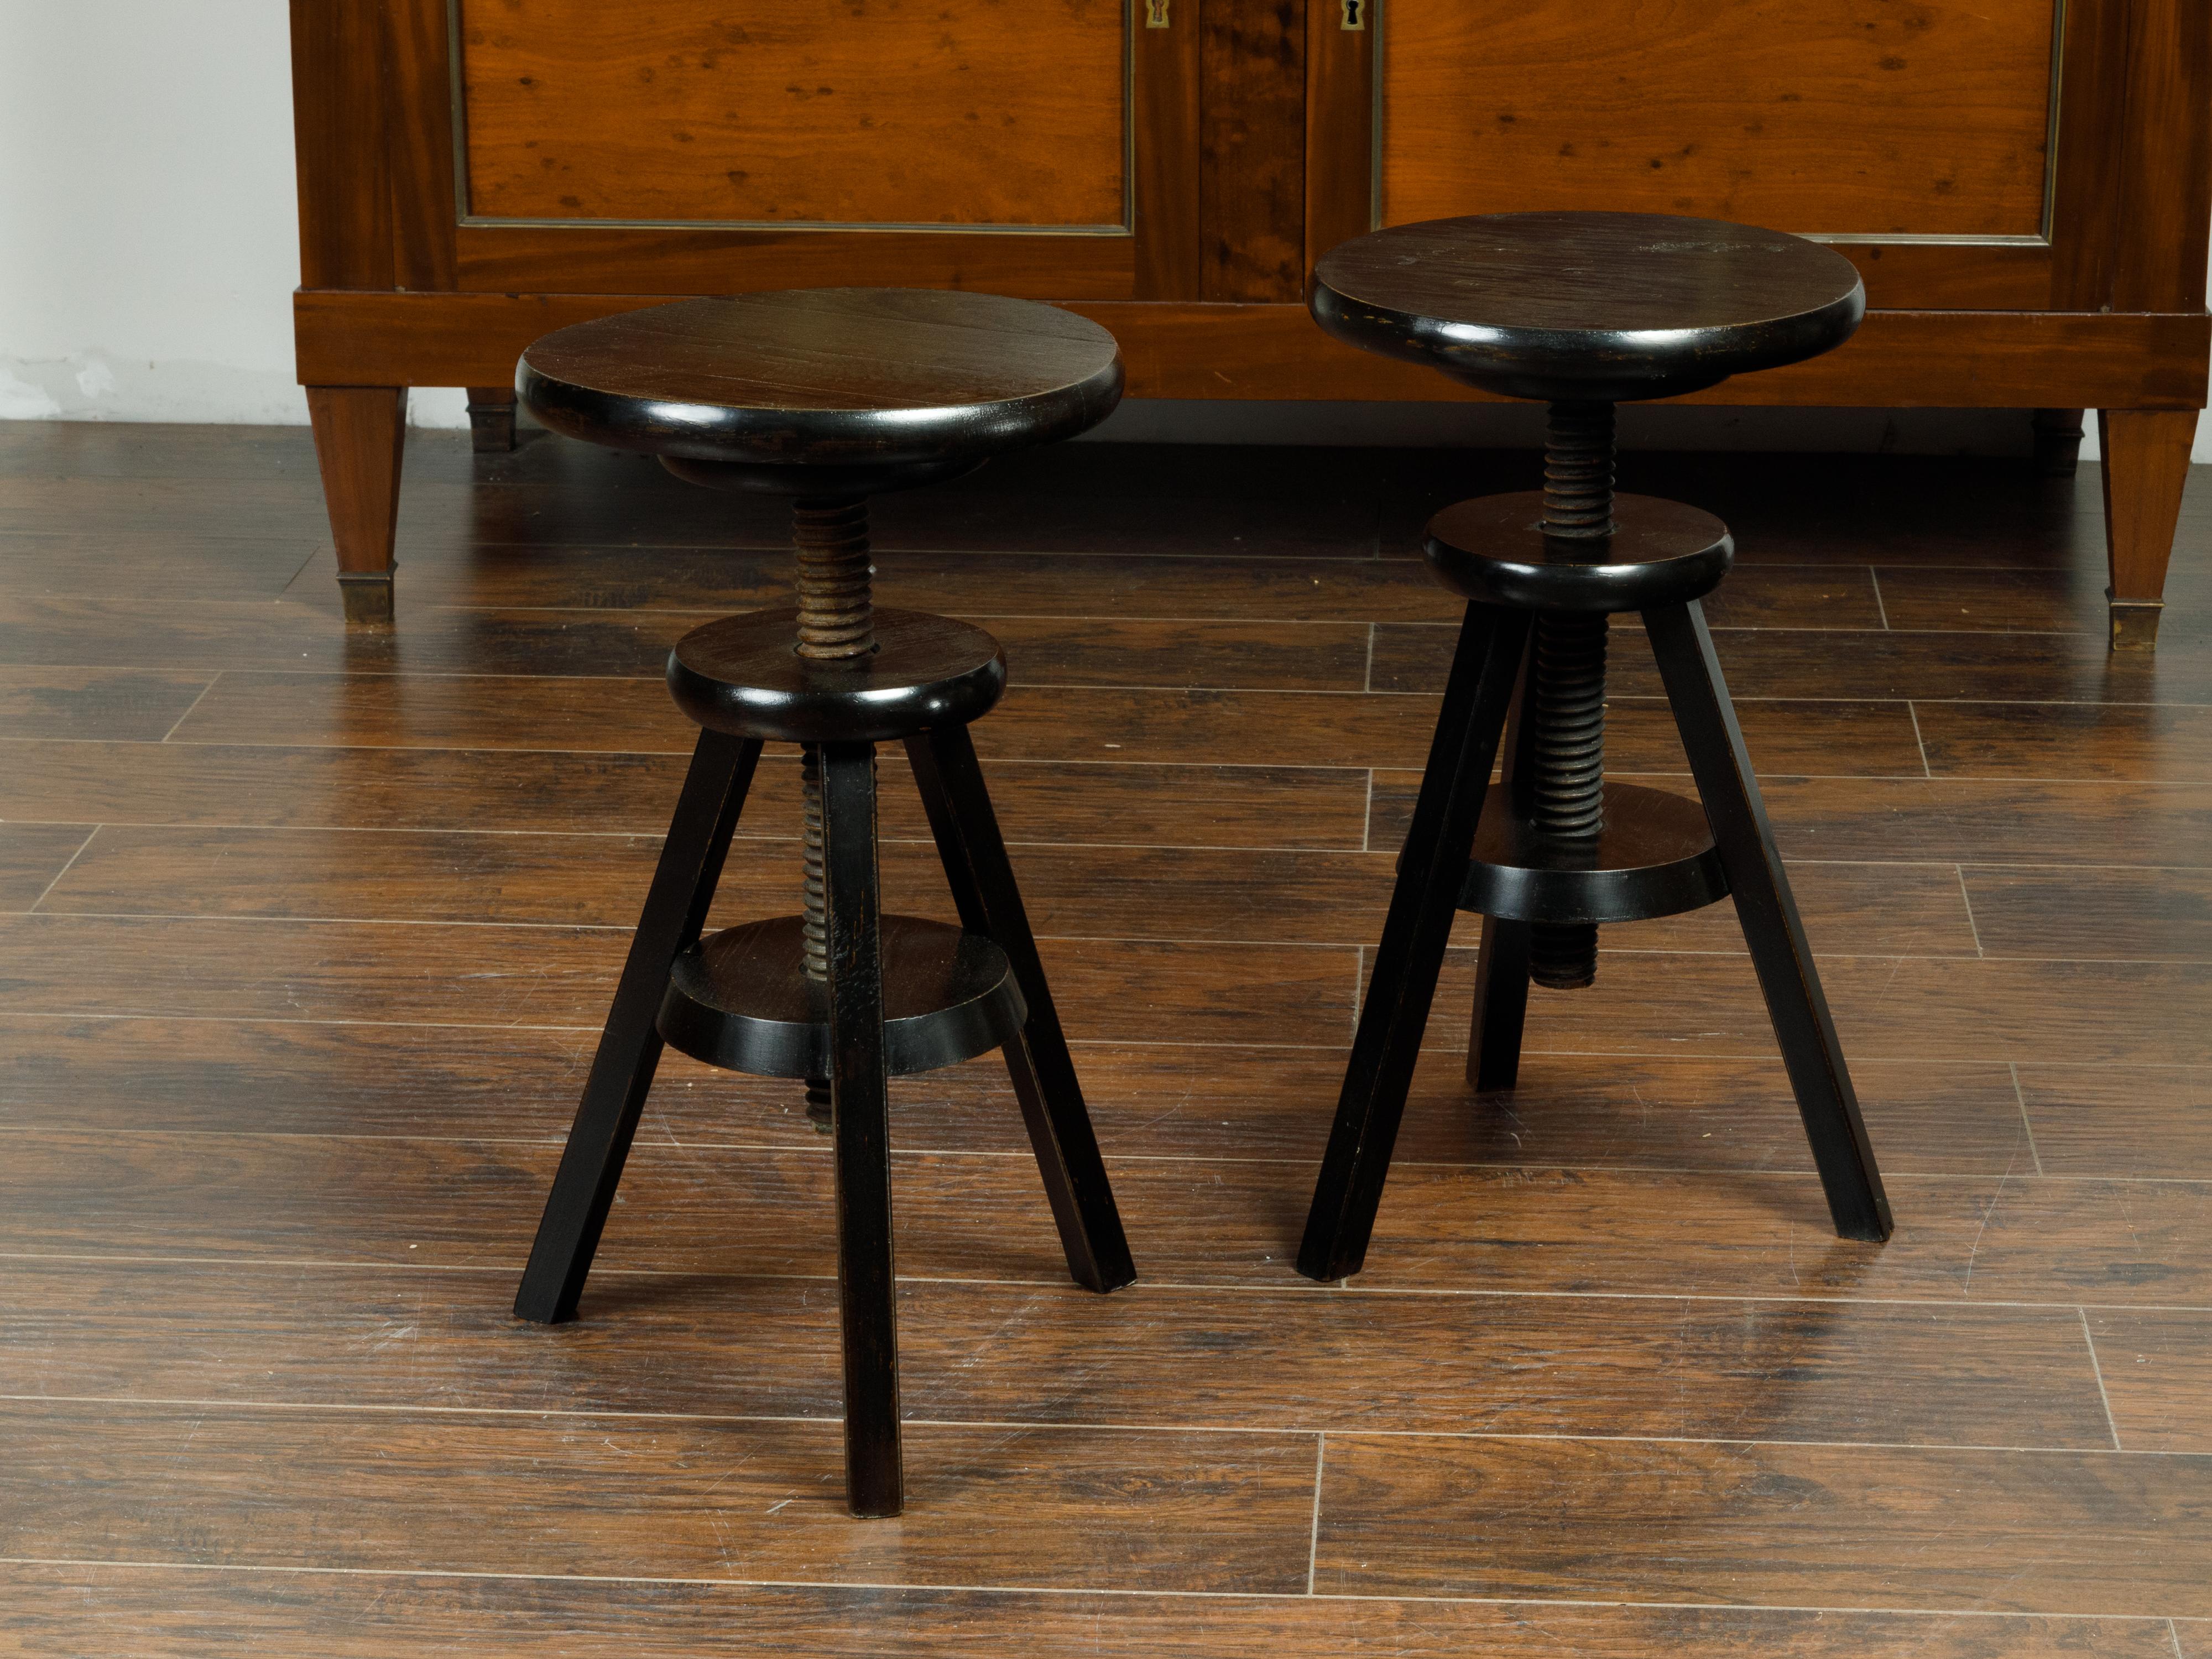 Pair of 1920s American Adjustable Artist's Stools with Black Finish In Good Condition For Sale In Atlanta, GA